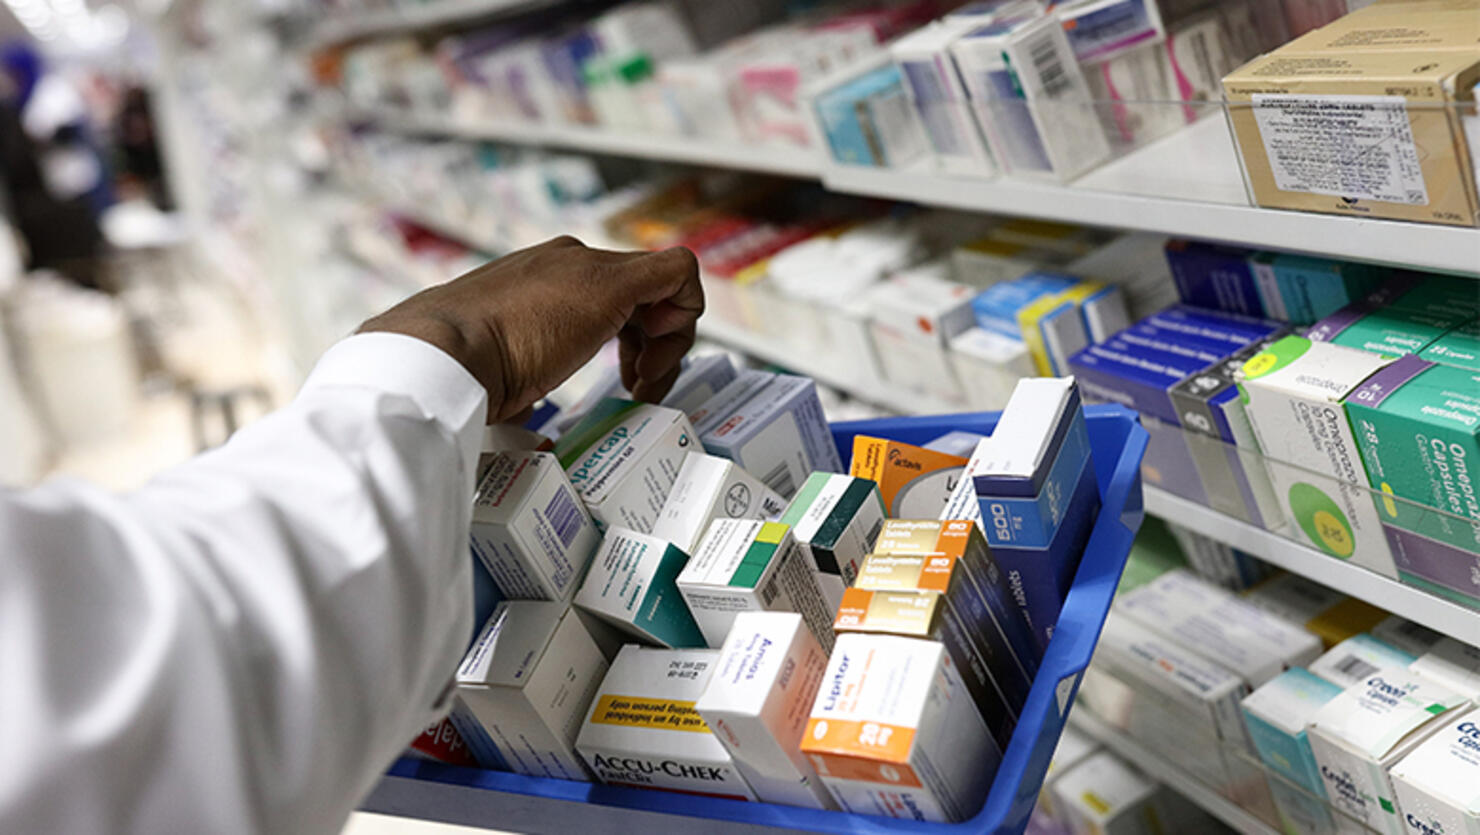 A pharmacist collects packets of boxed medication from the shelves of a pharmacy